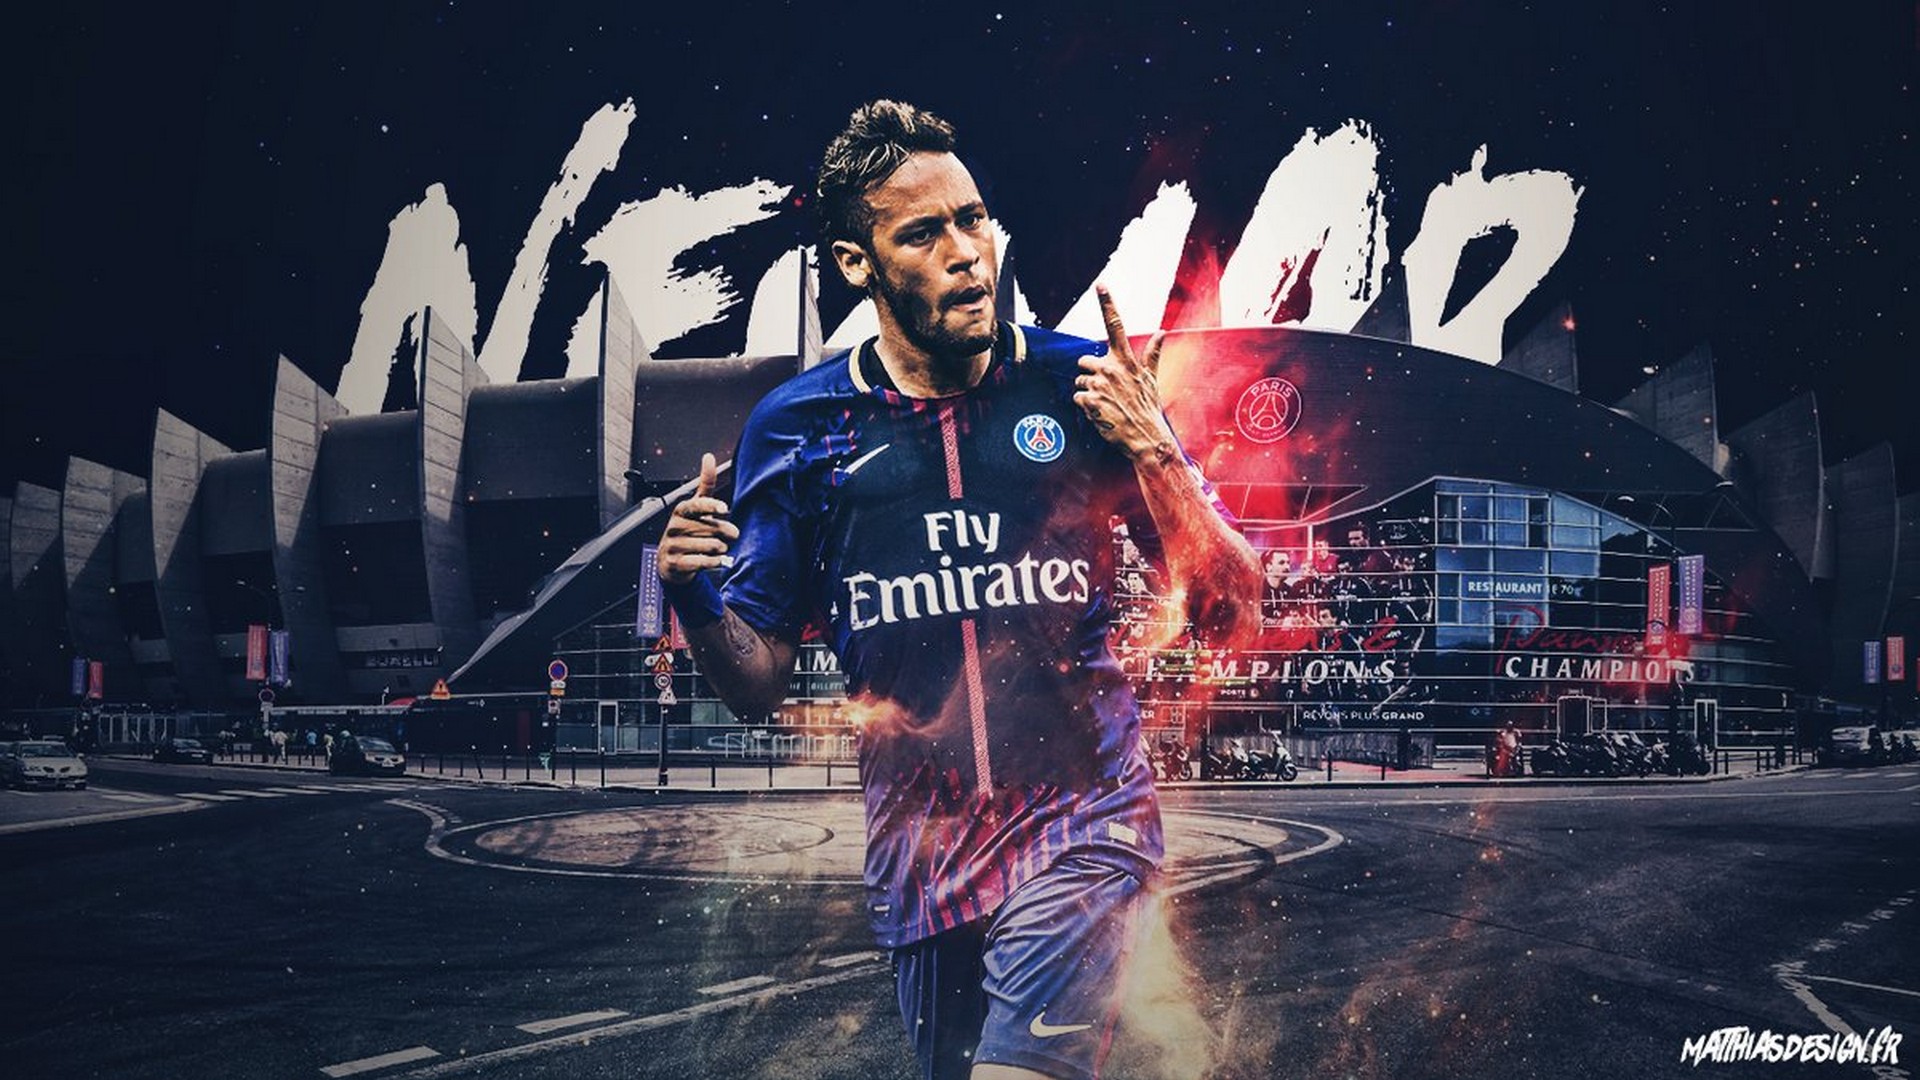 Neymar PSG Wallpaper For Desktop with resolution 1920X1080 pixel. You can use this wallpaper as background for your desktop Computer Screensavers, Android or iPhone smartphones